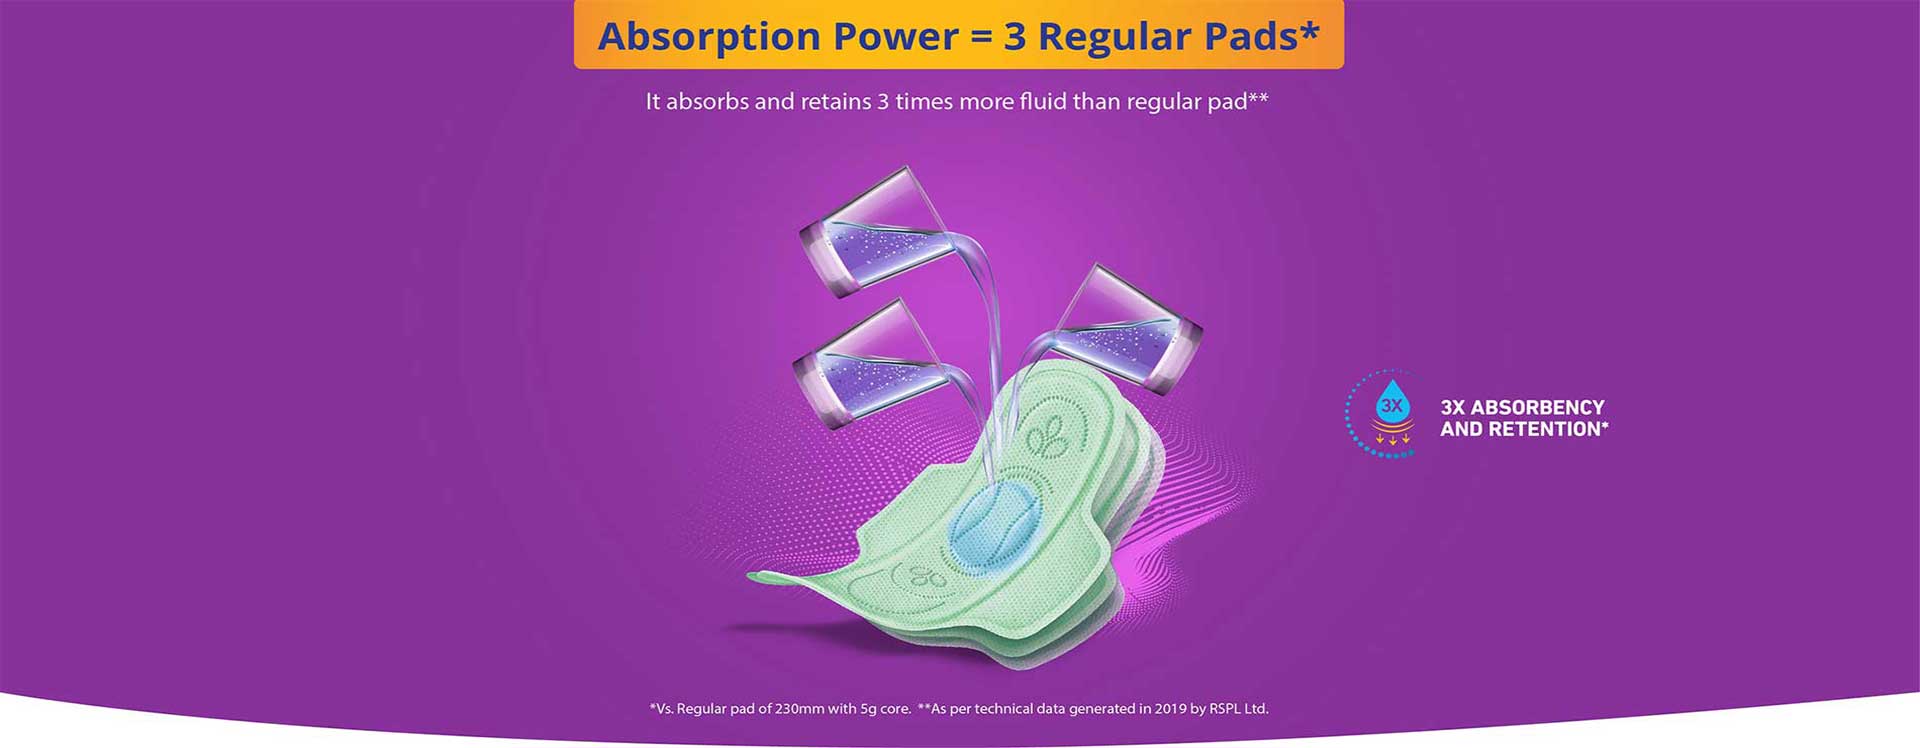 Pro-ease Sanitary Pads - Go XL Pads, 3X Absorption, Odour Control, 6 pcs